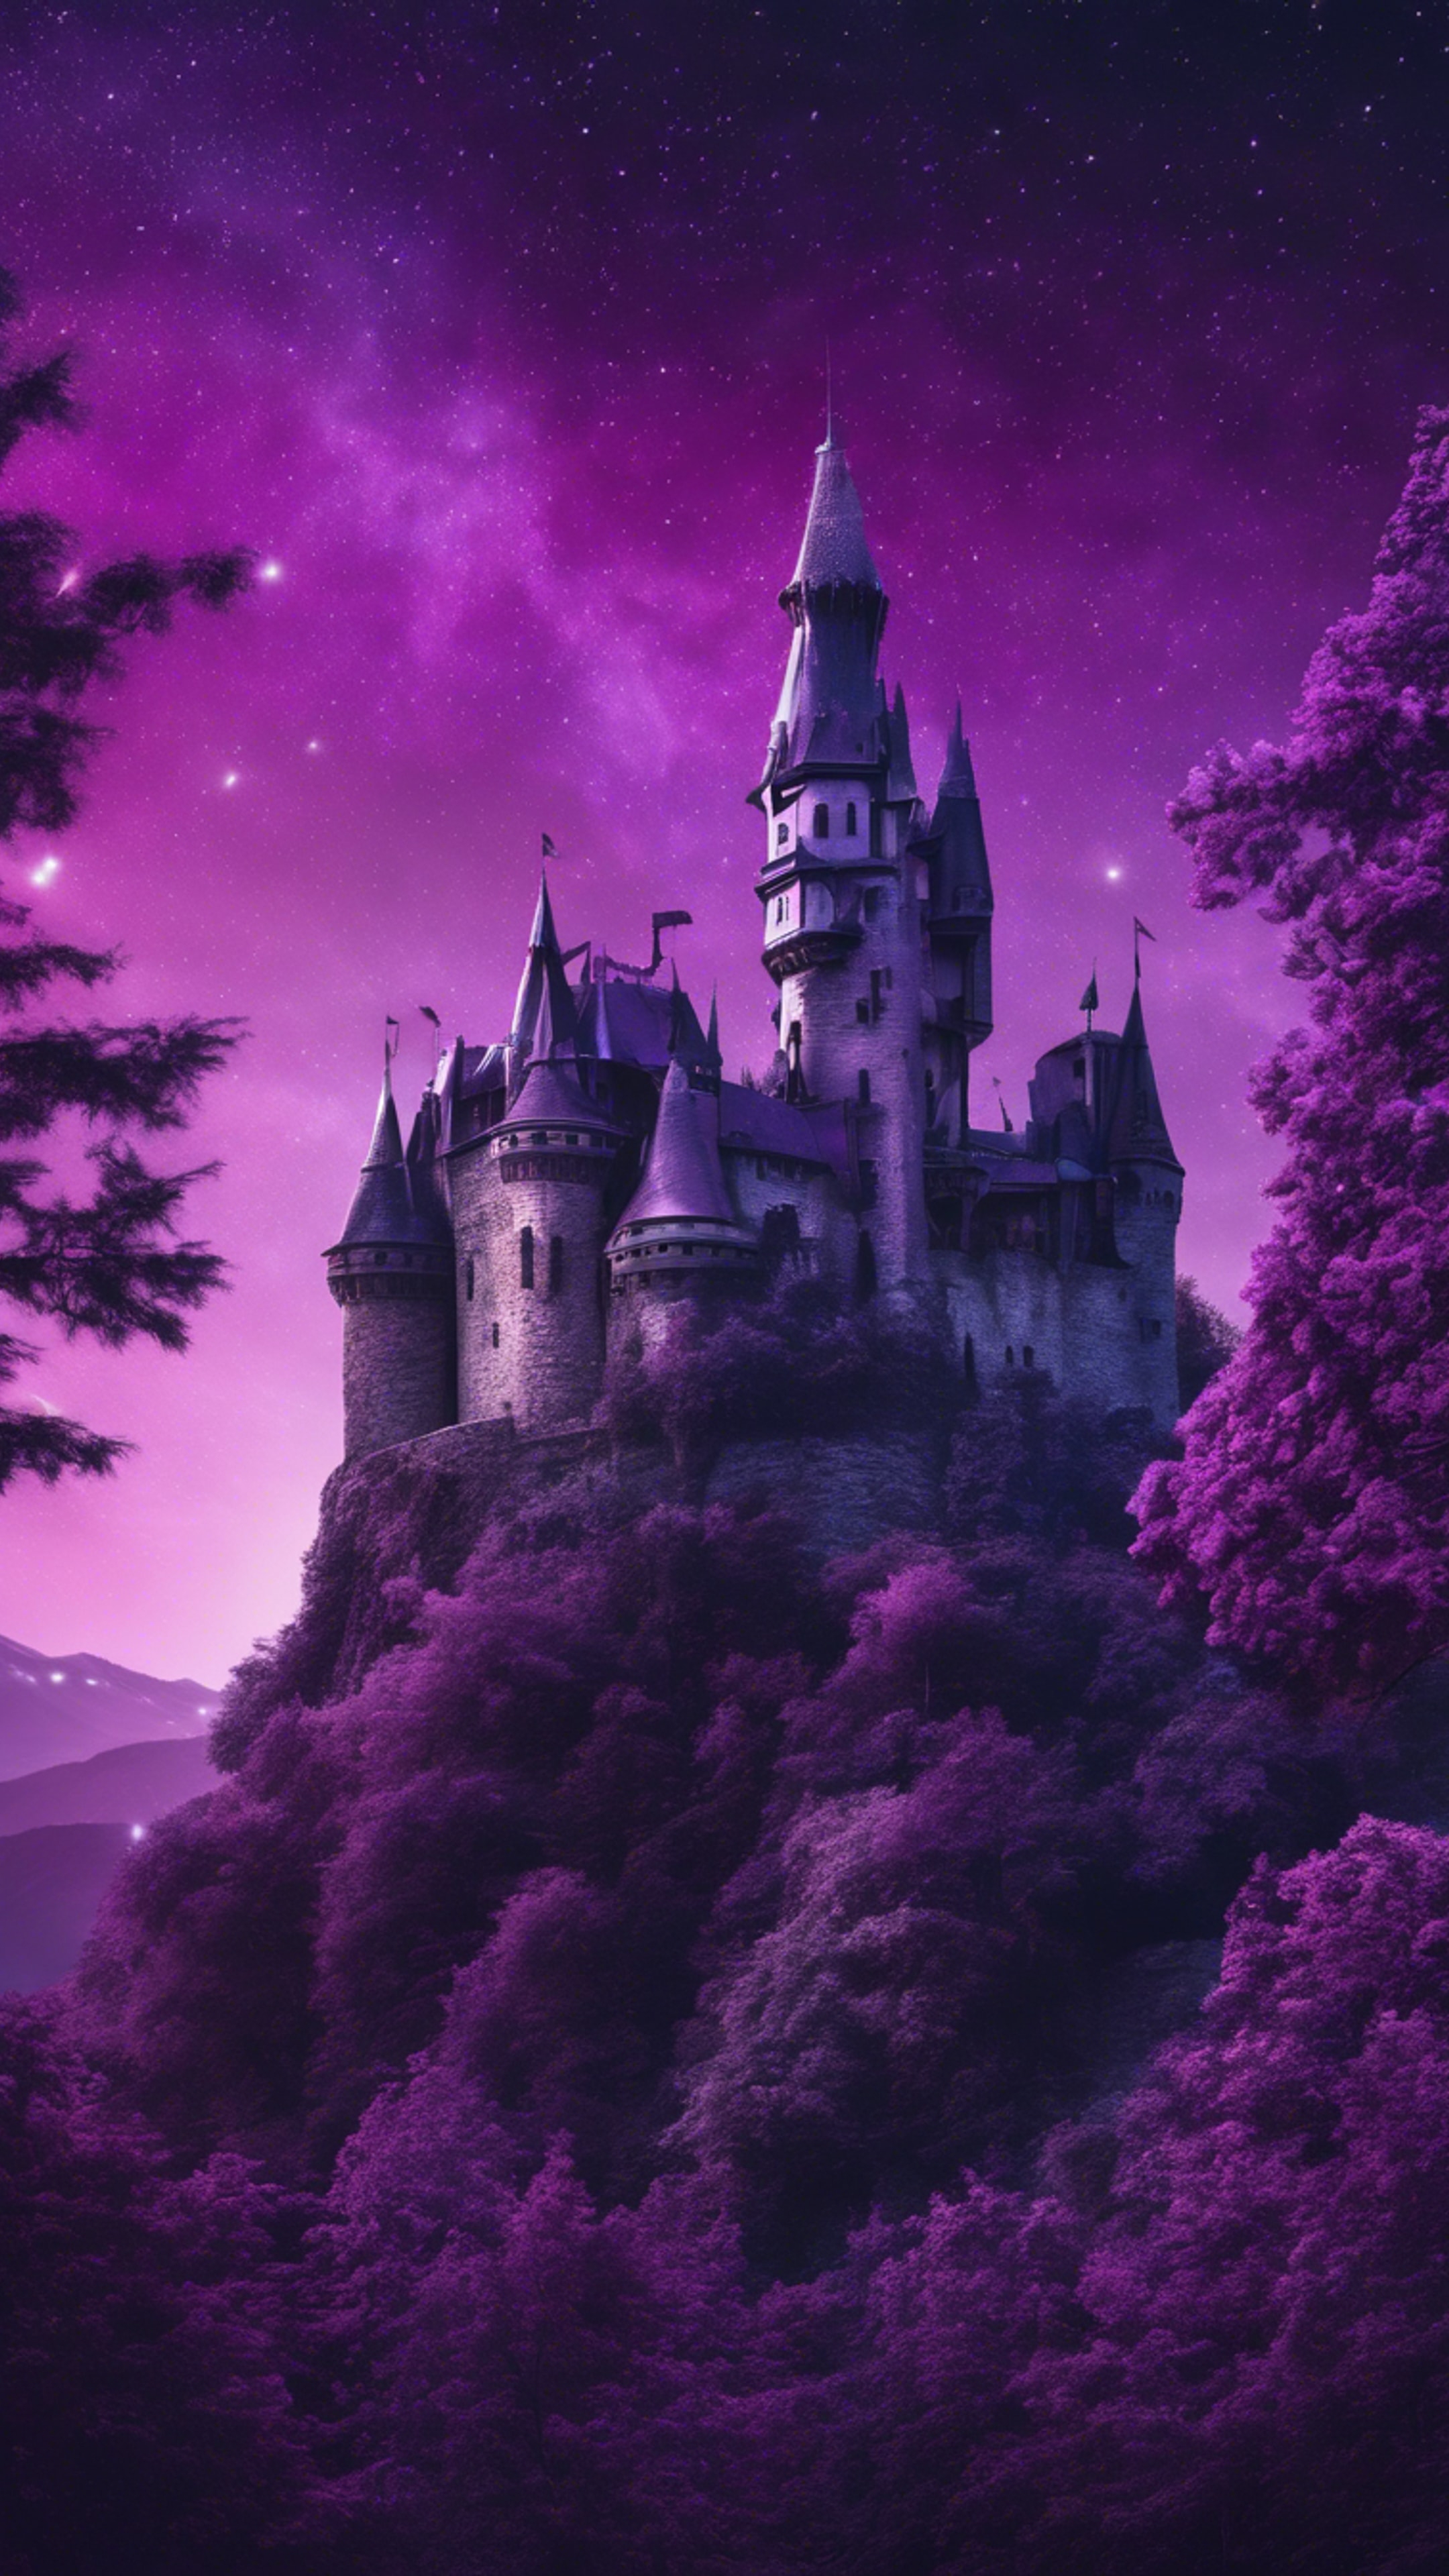 An imaginative collage including a deep purple night sky, a majestic purple castle, and a lush violet forest. Tapet[d69784f3cee744e79a0a]